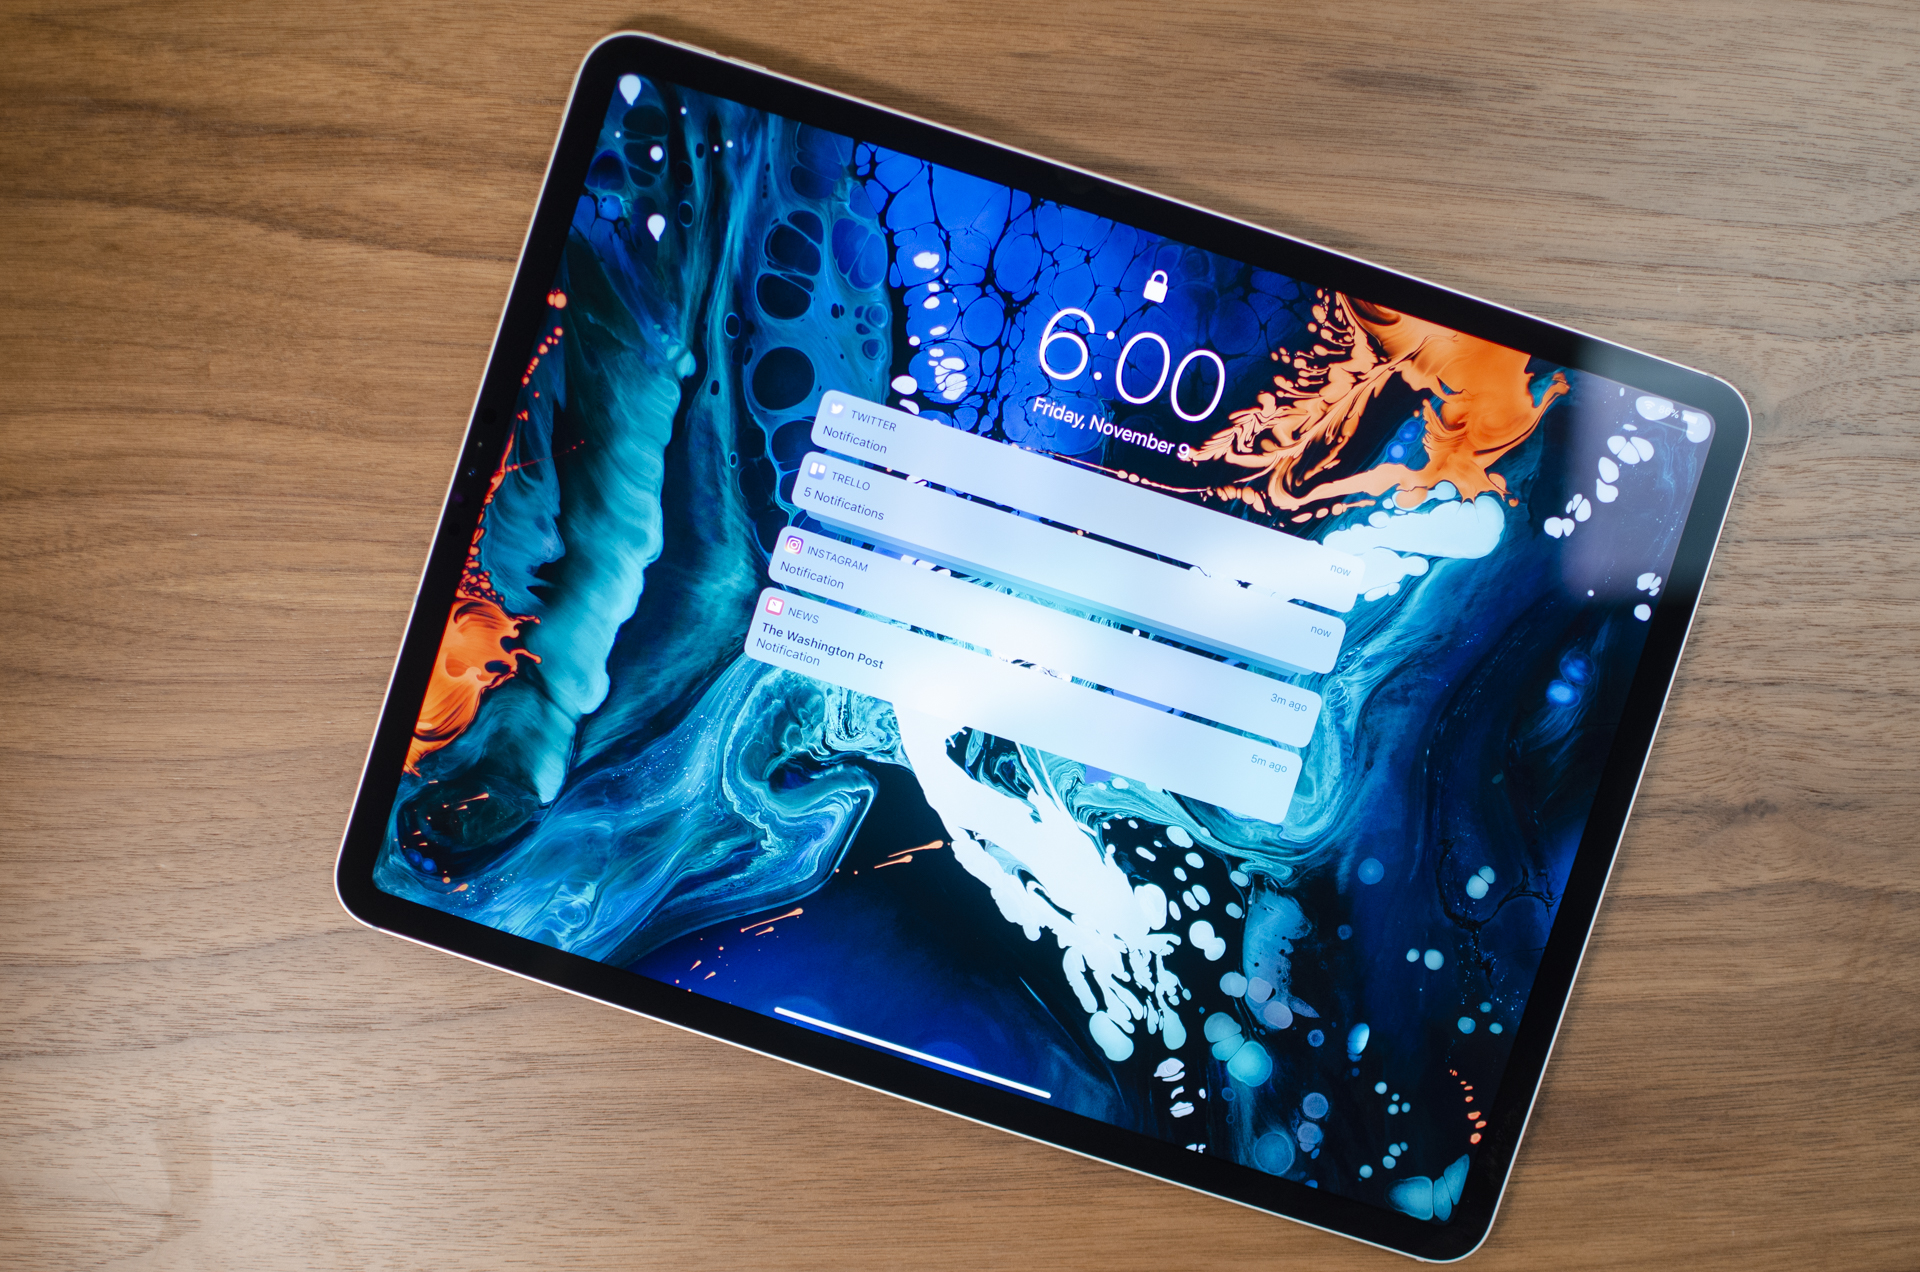 iPad Pro (2018) Review: The Best Tablet Money Can Buy | Digital Trends